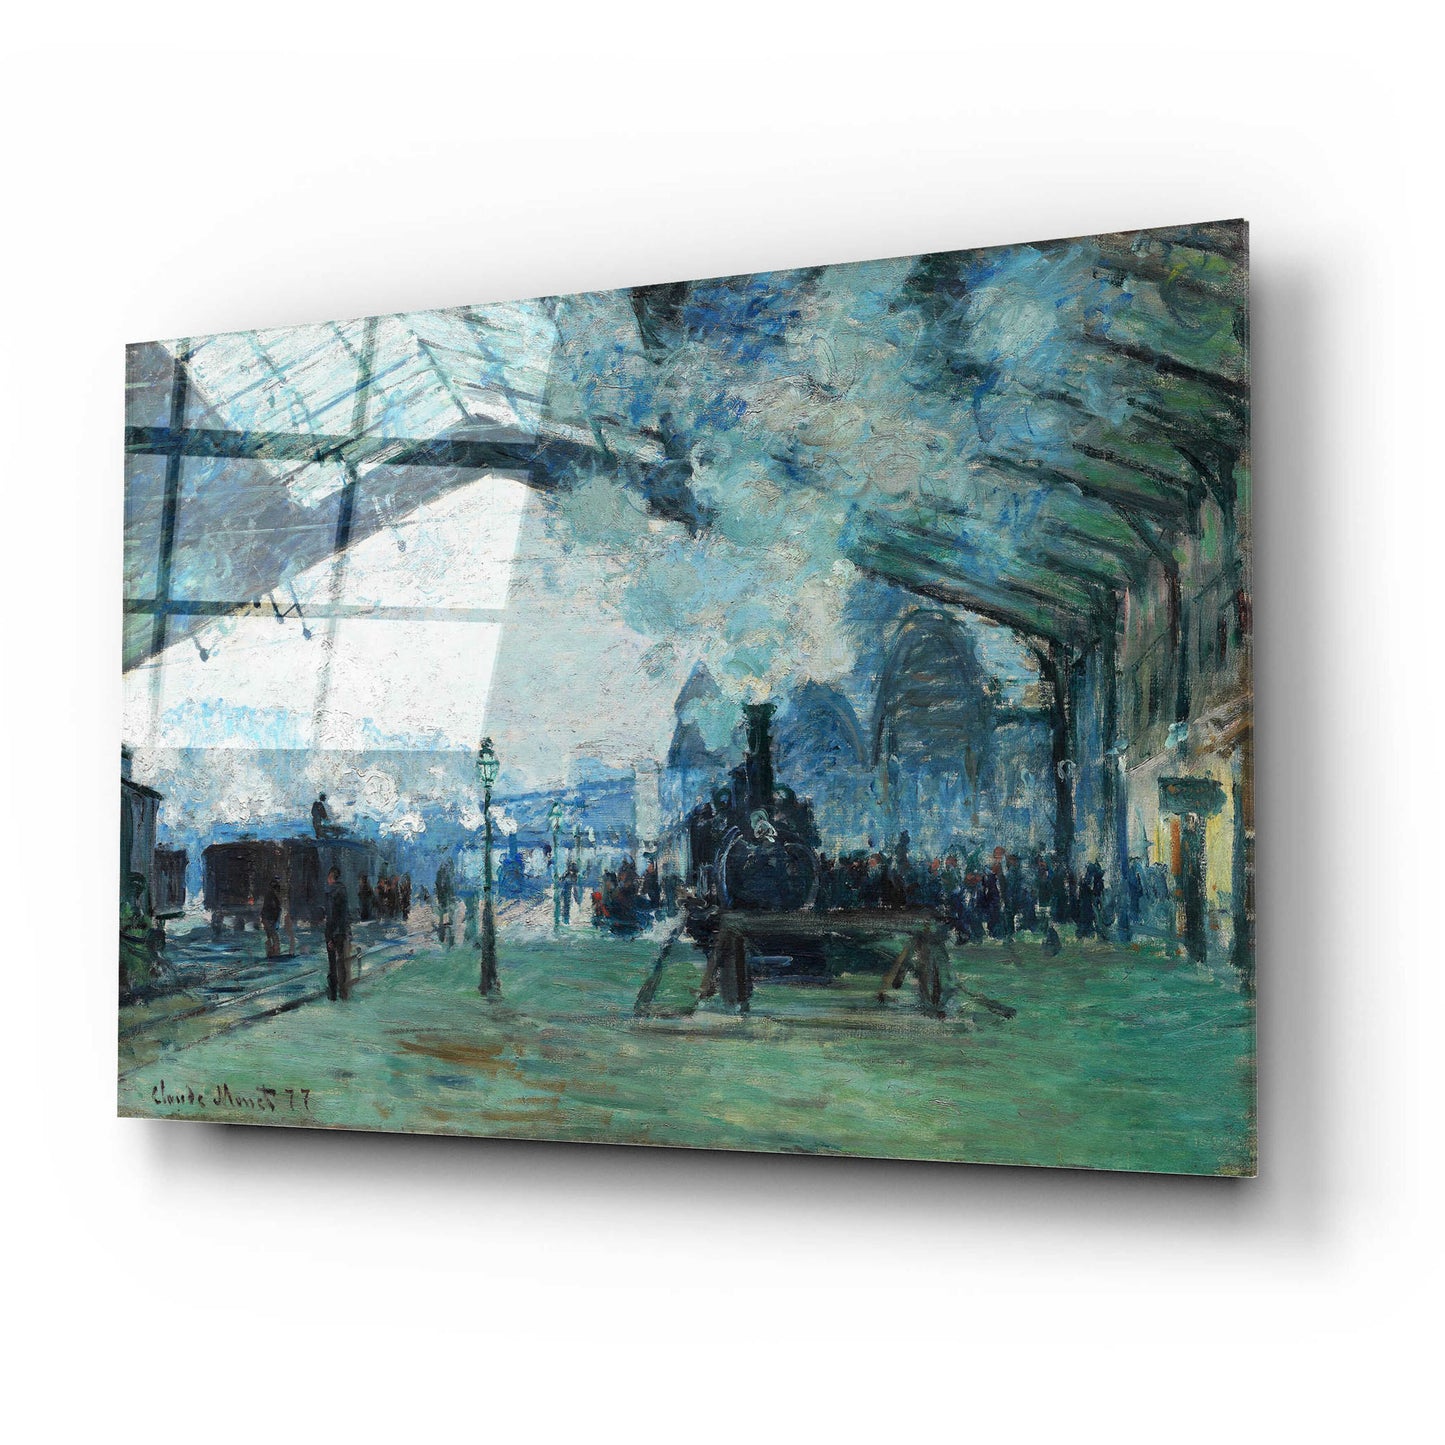 Epic Art 'Ariival Of The Normandy Train' by Claude Monet, Acrylic Glass Wall Art,24x16